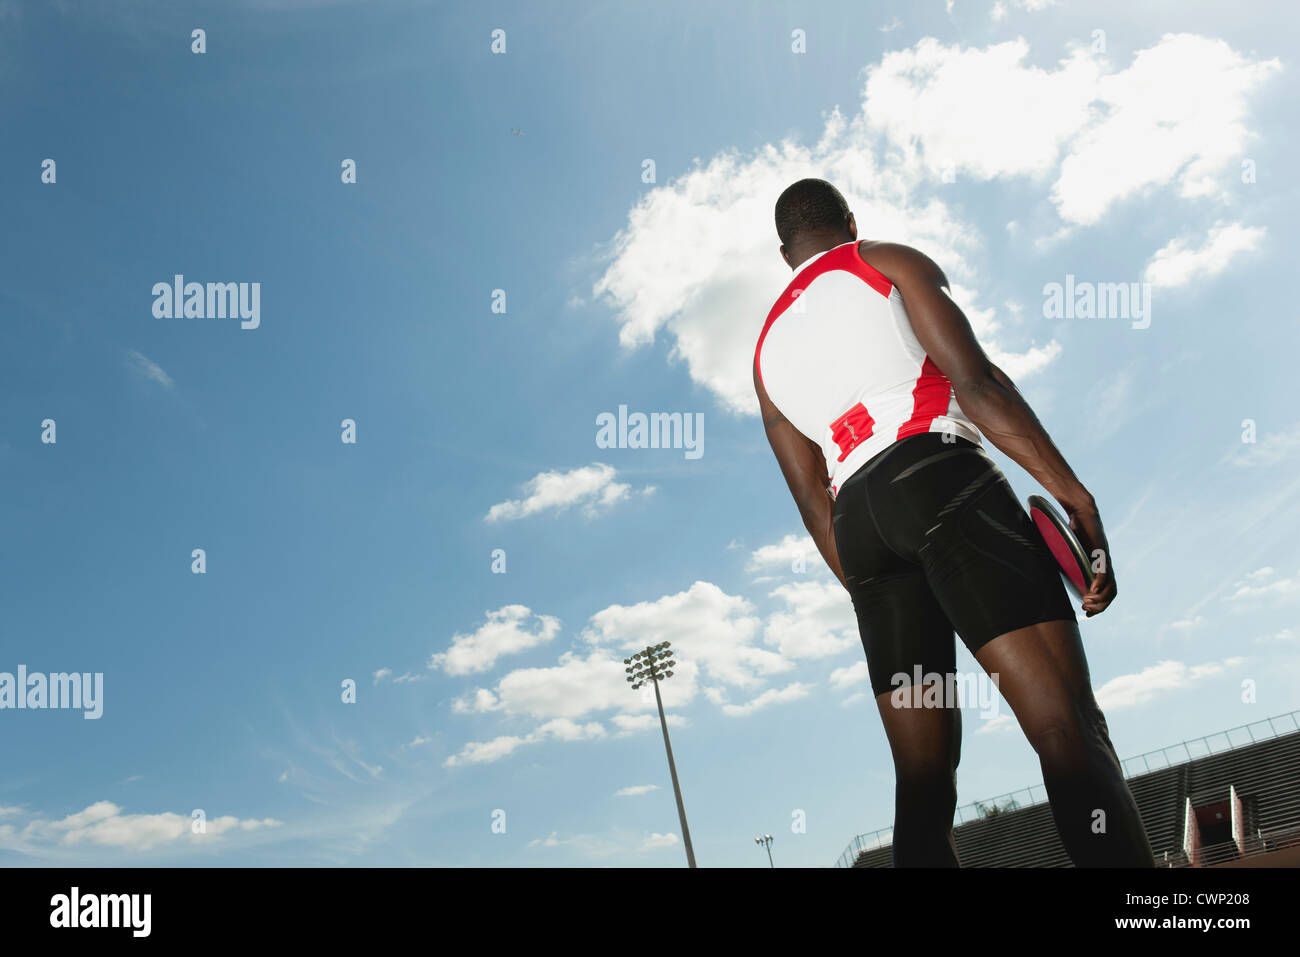 Male athlete holding discus, rear view Stock Photo